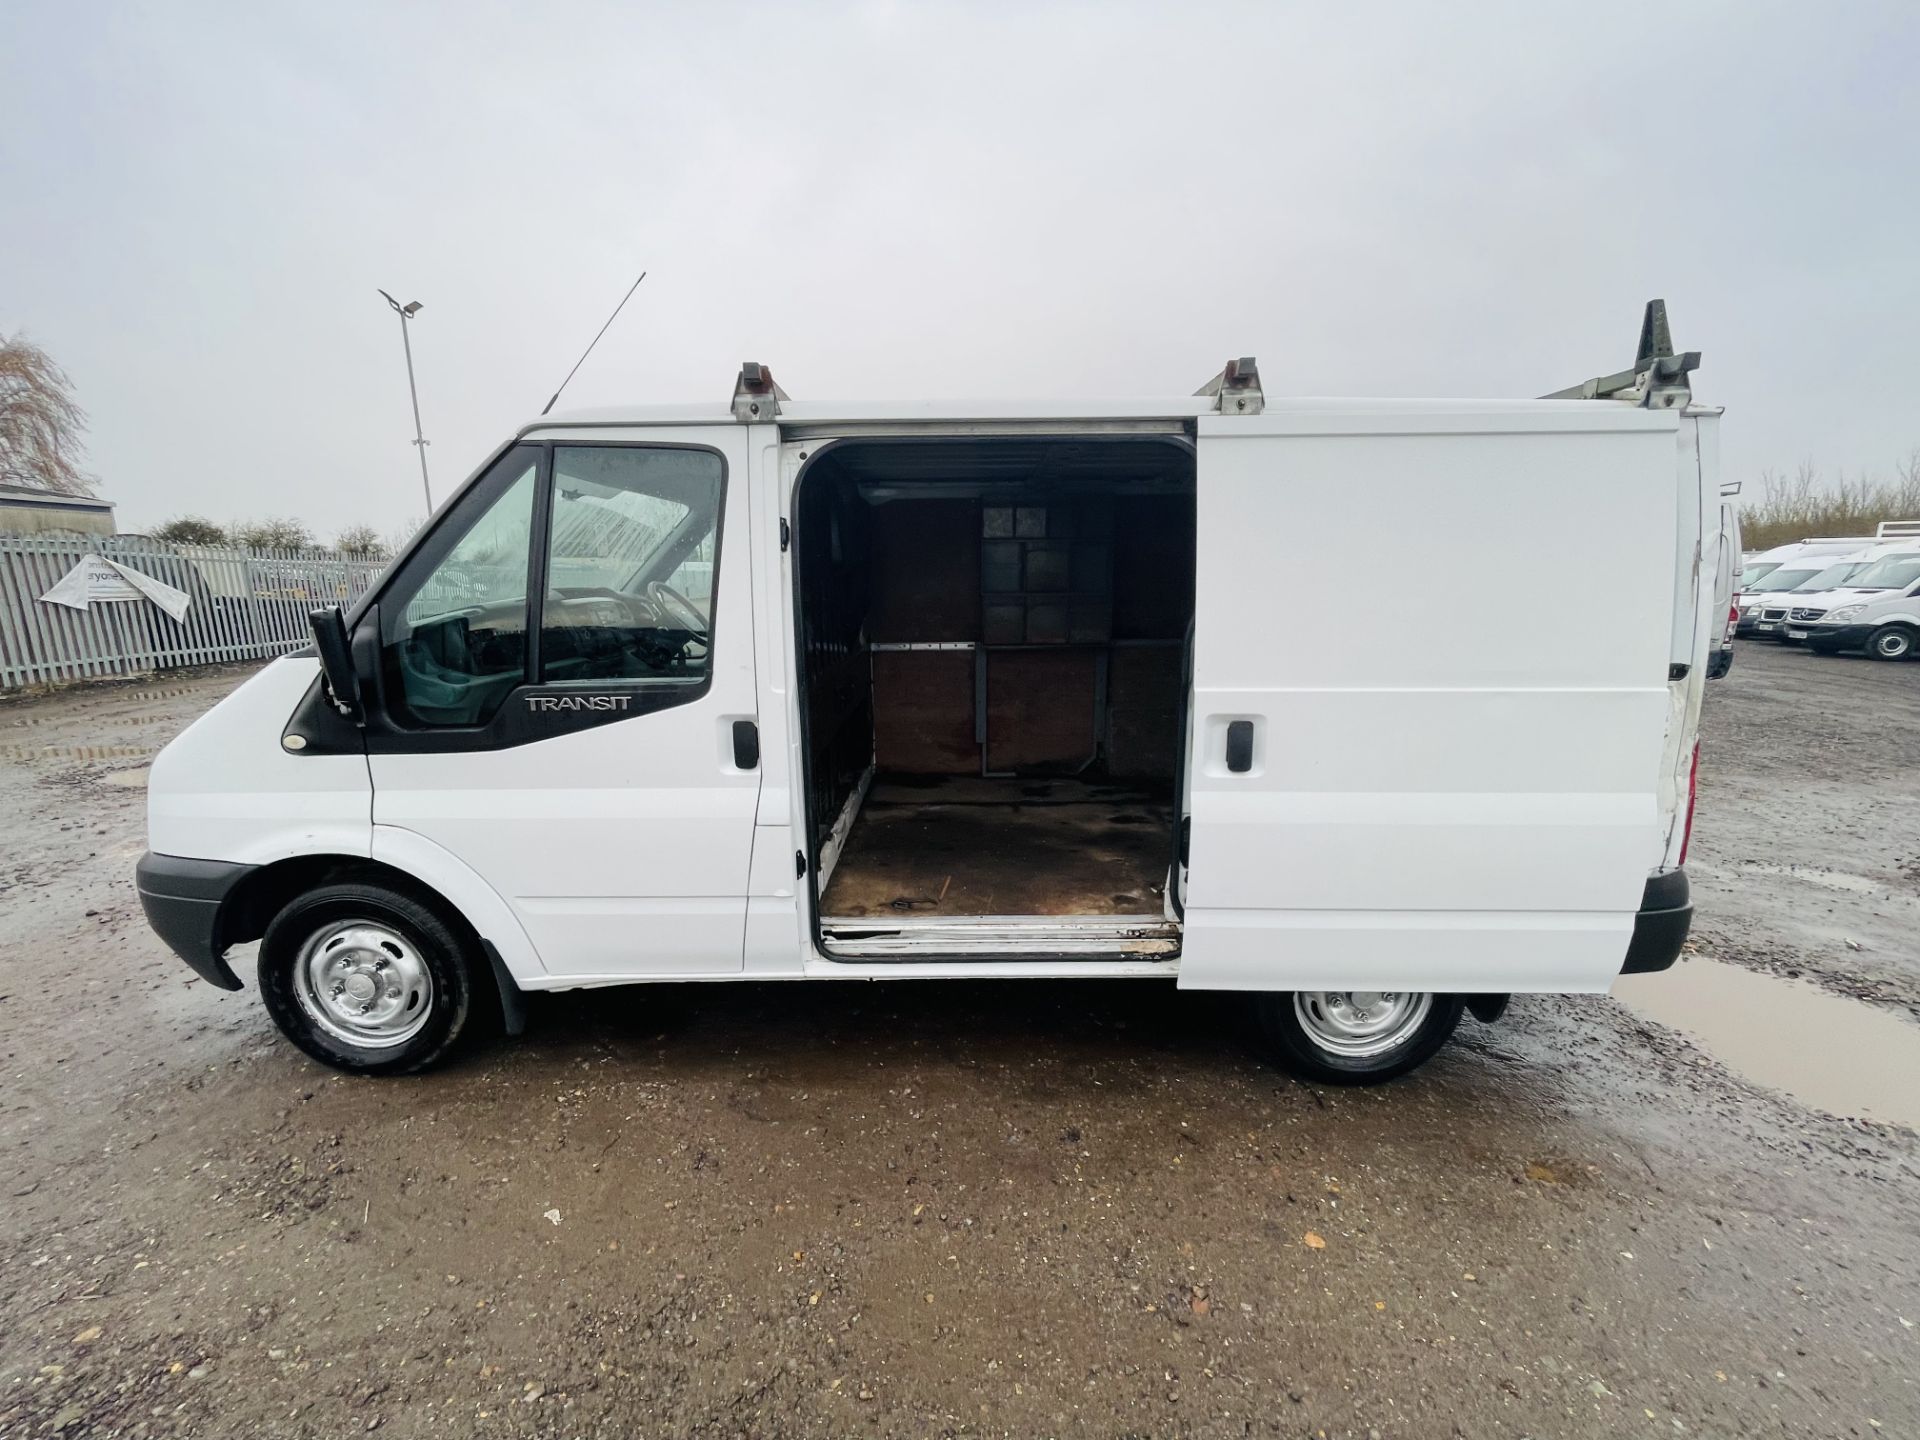 ** ON SALE ** Ford Transit 2.2 TDCI 100 FWD L1 H1 2013 '13 Reg' - Air con - No Vat Save 20% - Image 11 of 21